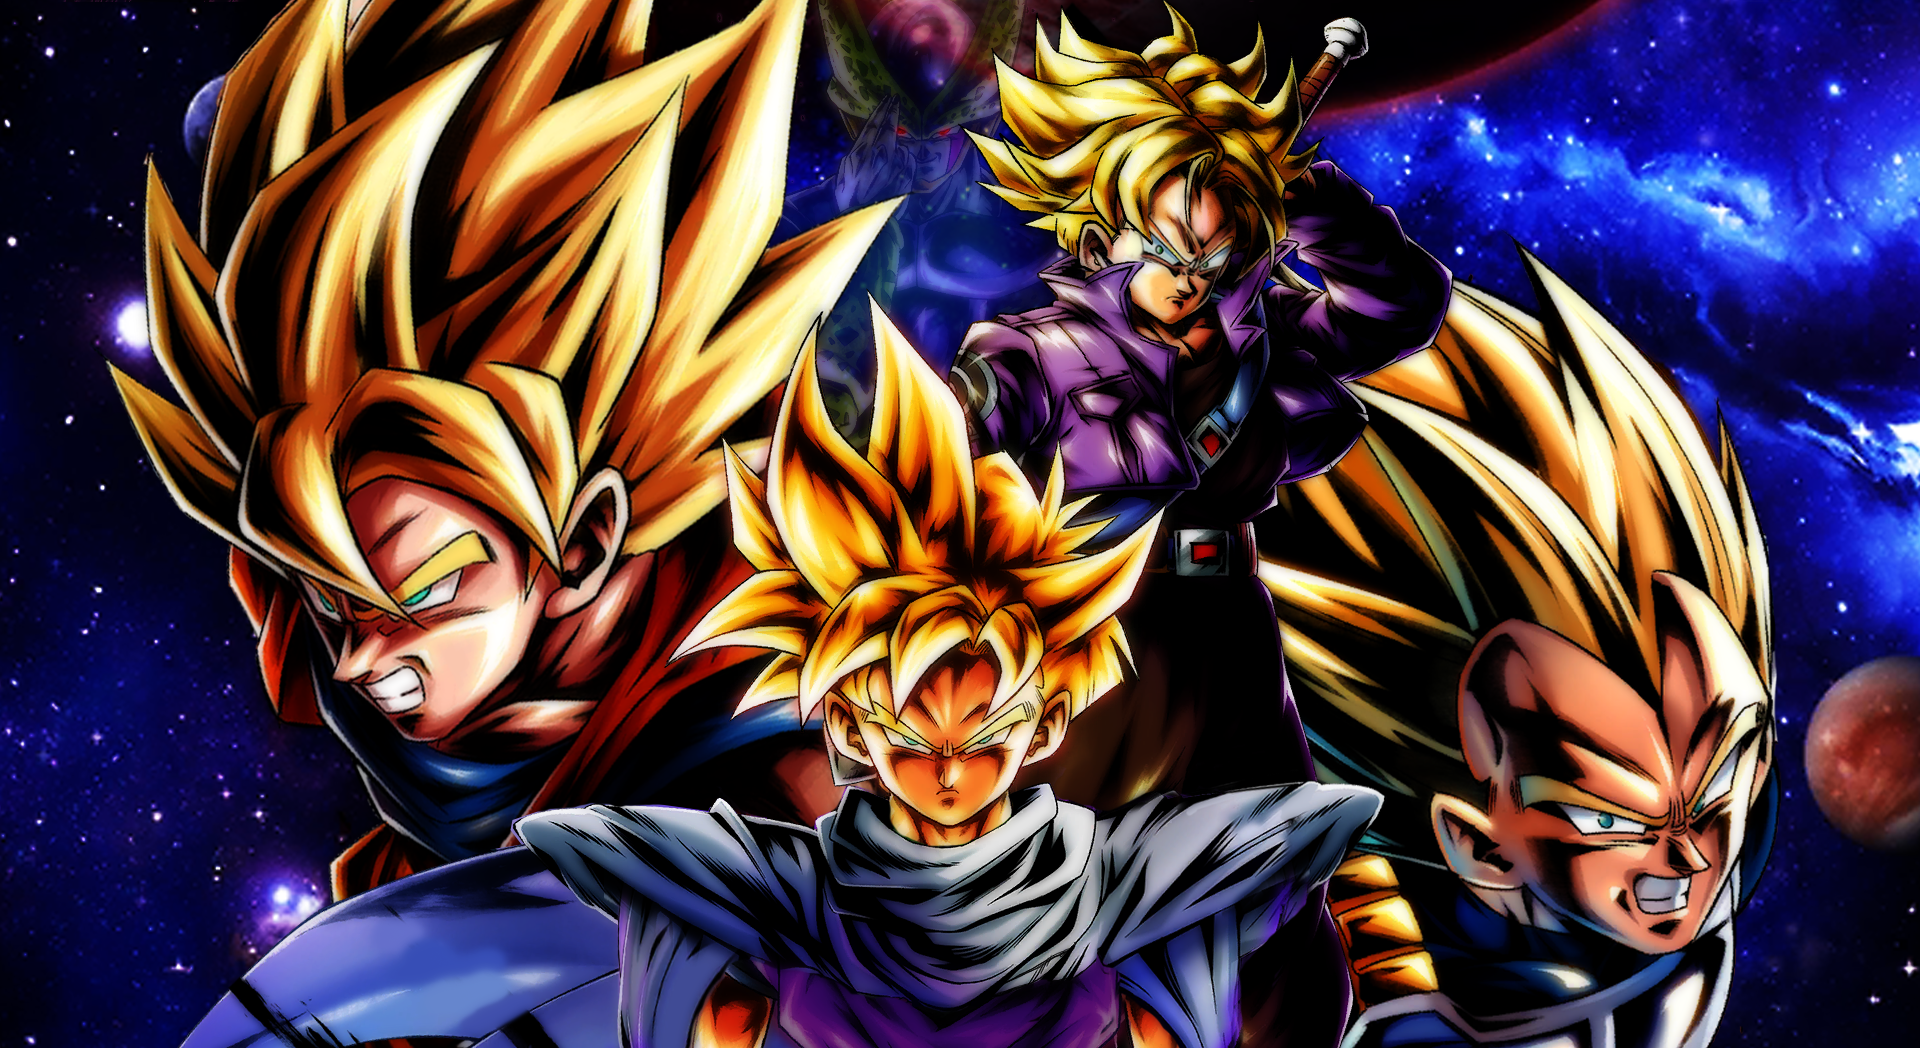 Wele to the cell games desktop wallpaper first edit in a couple of months rdragonballlegends